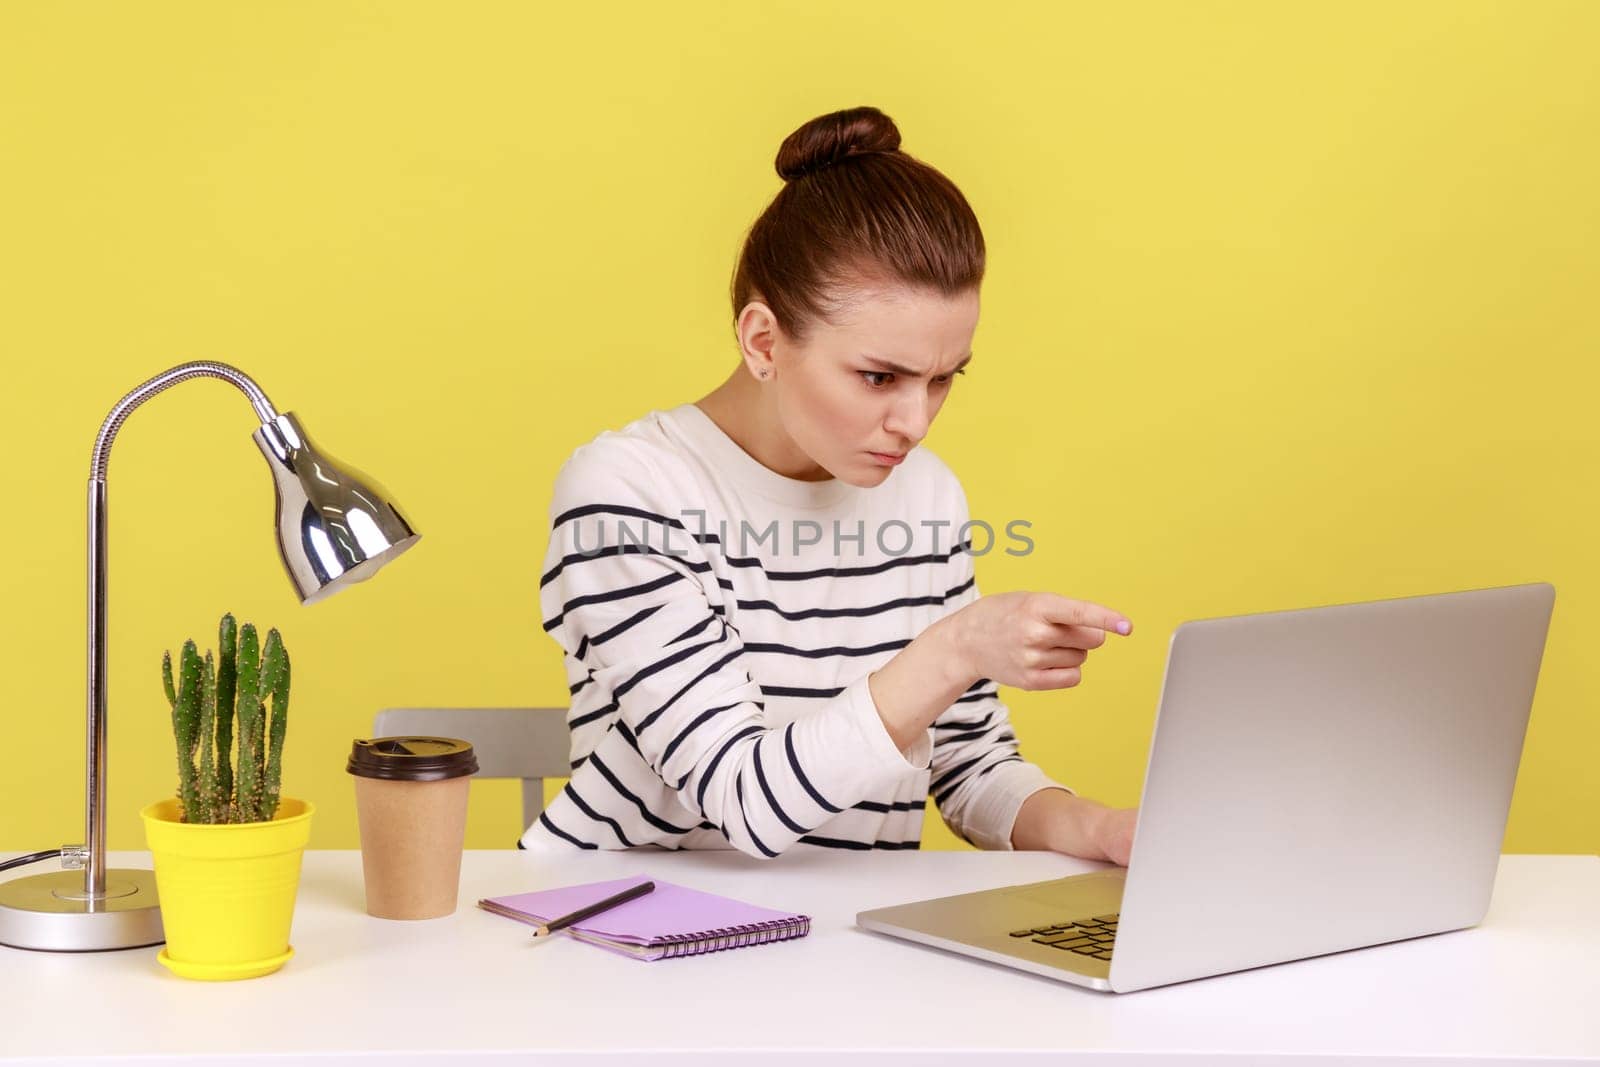 Angry woman office worker in striped shirt pointing to laptop screen, scolding and accusing talking on video call, having online conference. Indoor studio studio shot isolated on yellow background.